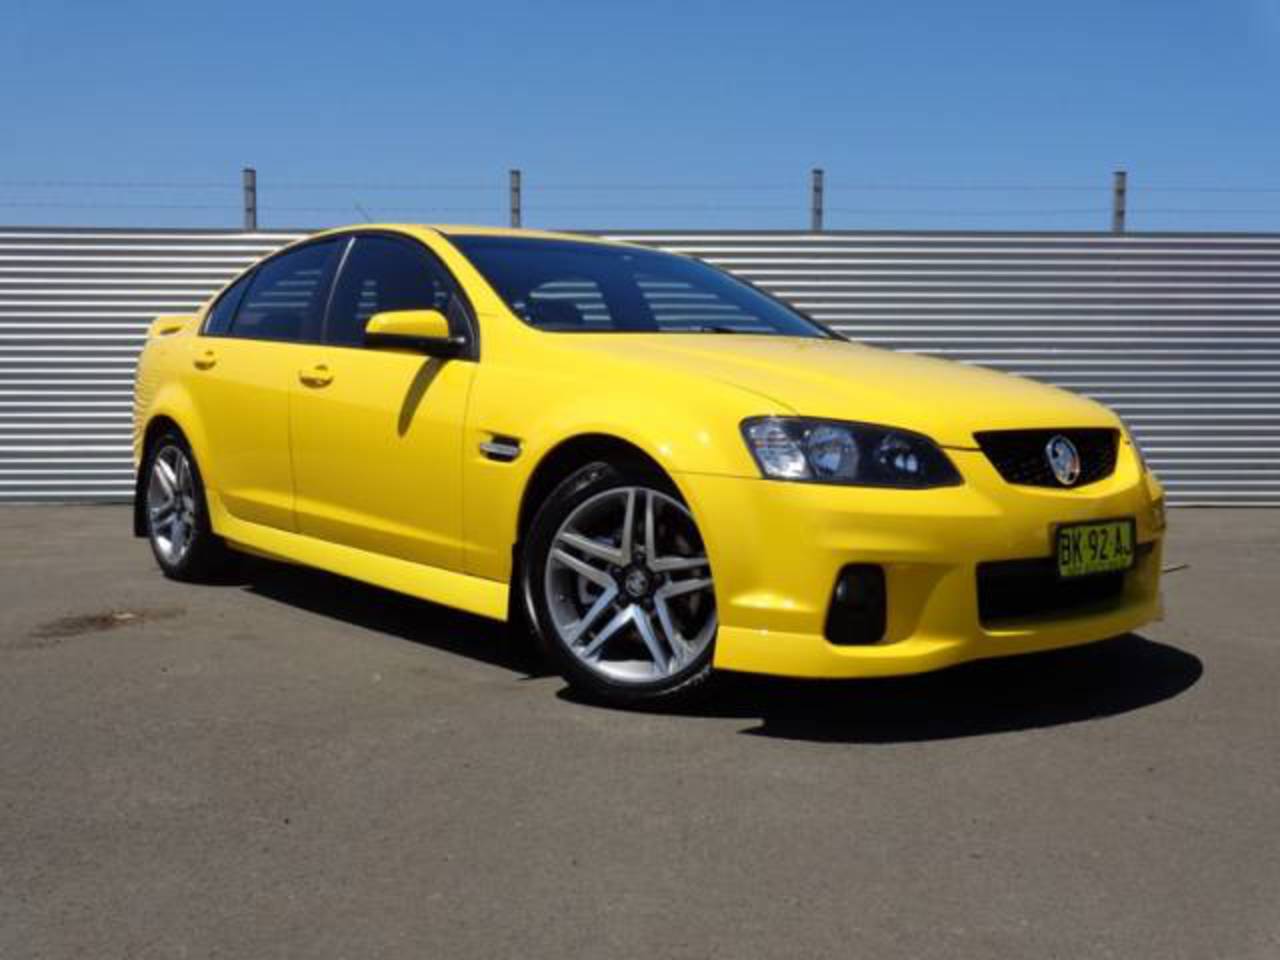 Accueil > Véhicules d'occasion en stock > Holden Commodore SS VE Series II 2011